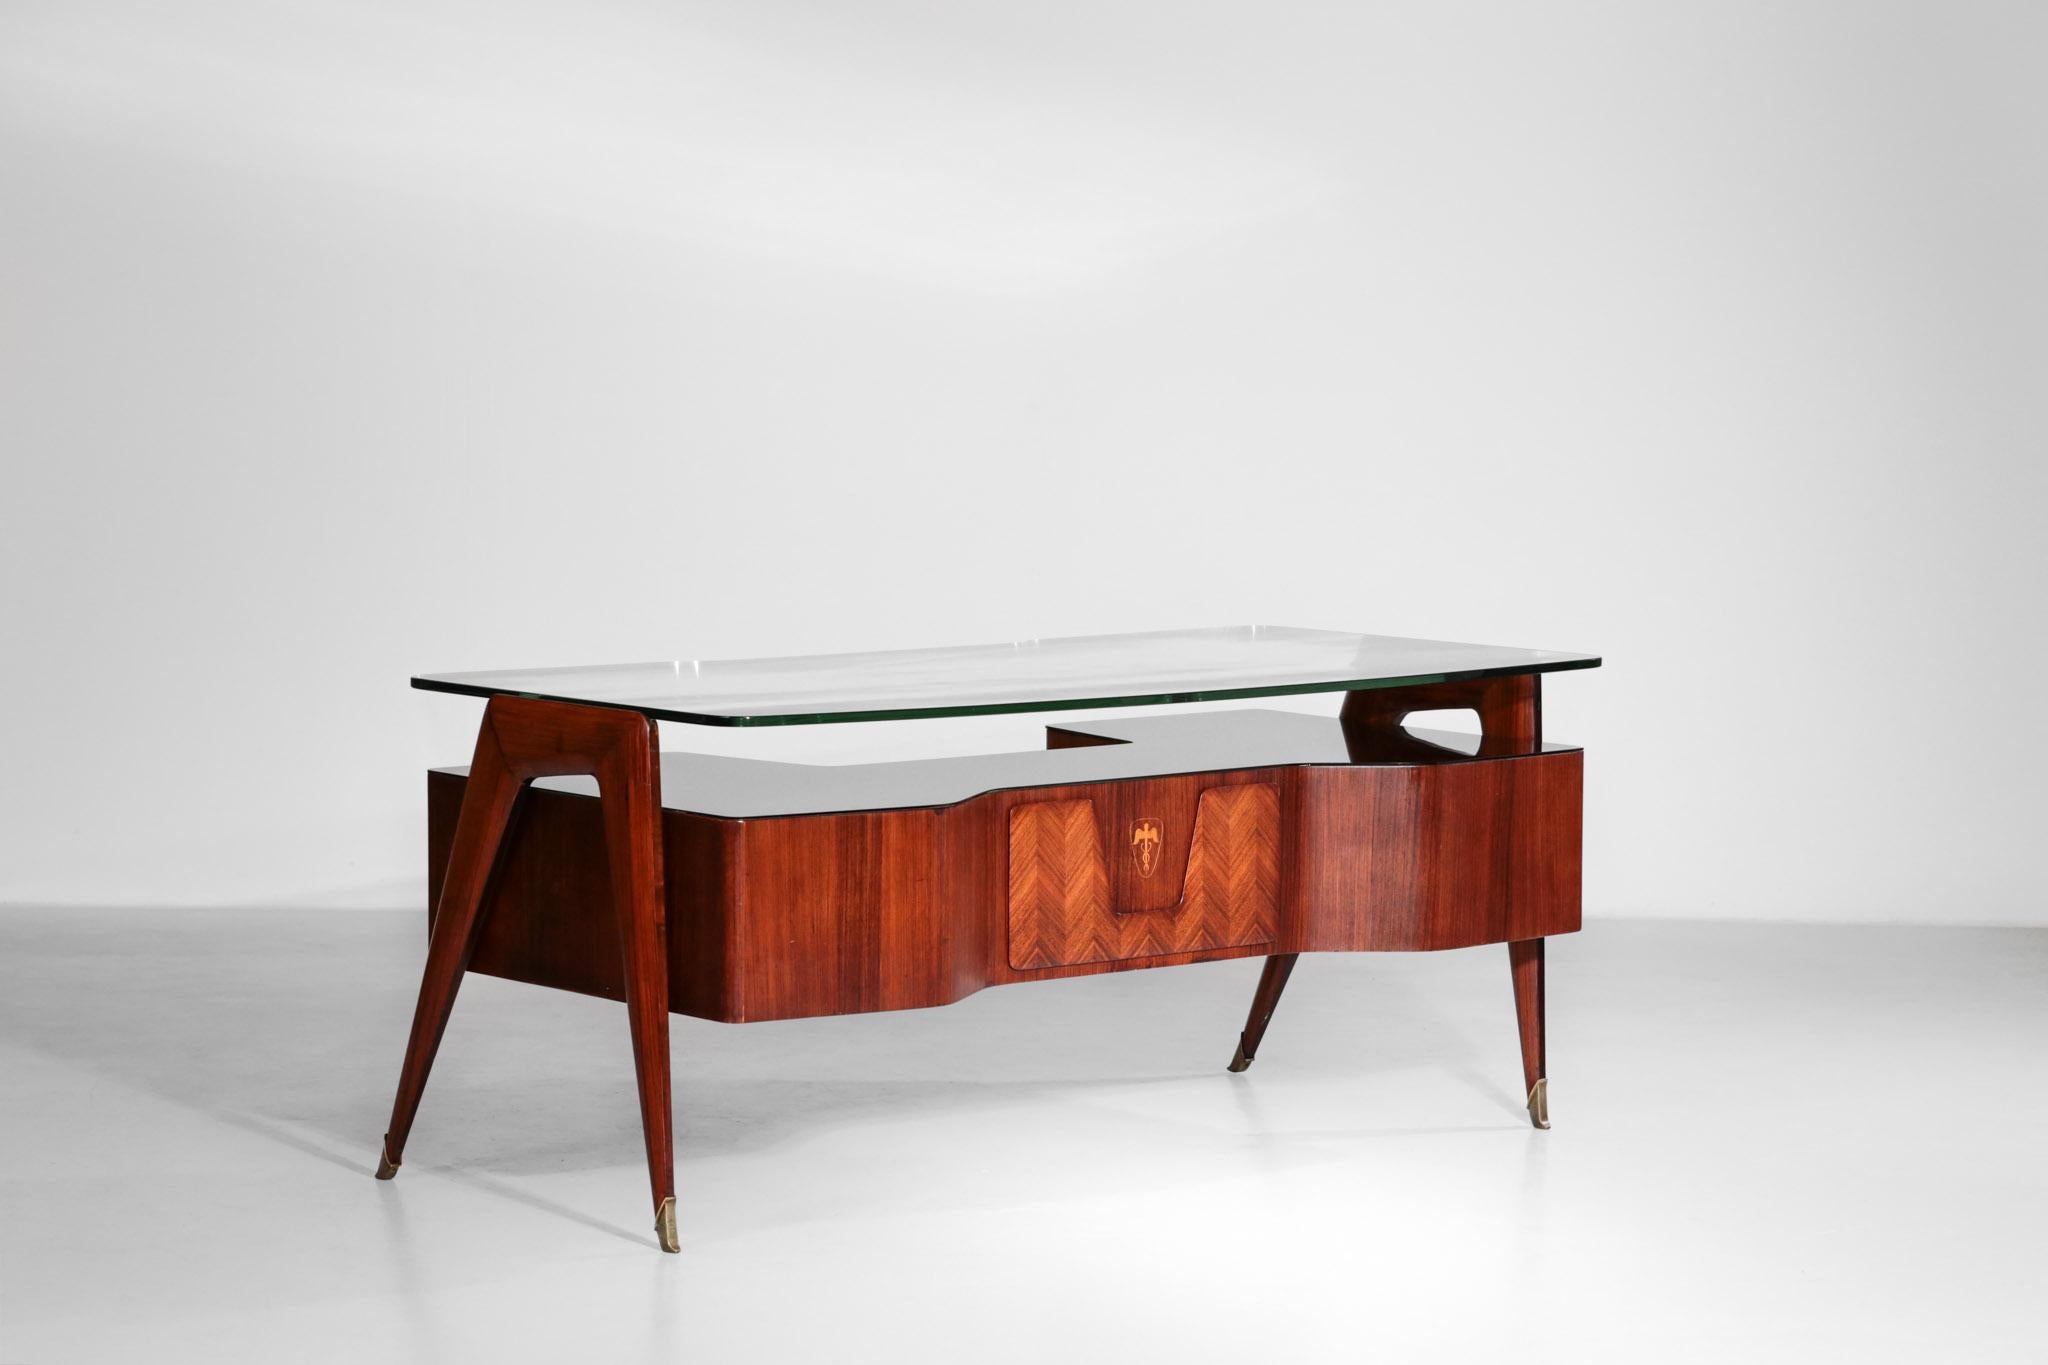 Incredible desk by the famous designer Vittorio Dassi.
This desk has a thick glass on the top supported by a structure in walnut. Another glass in brown is situated on the top of the cases.
Nice marquetry and brass legs.
Many details and curb,